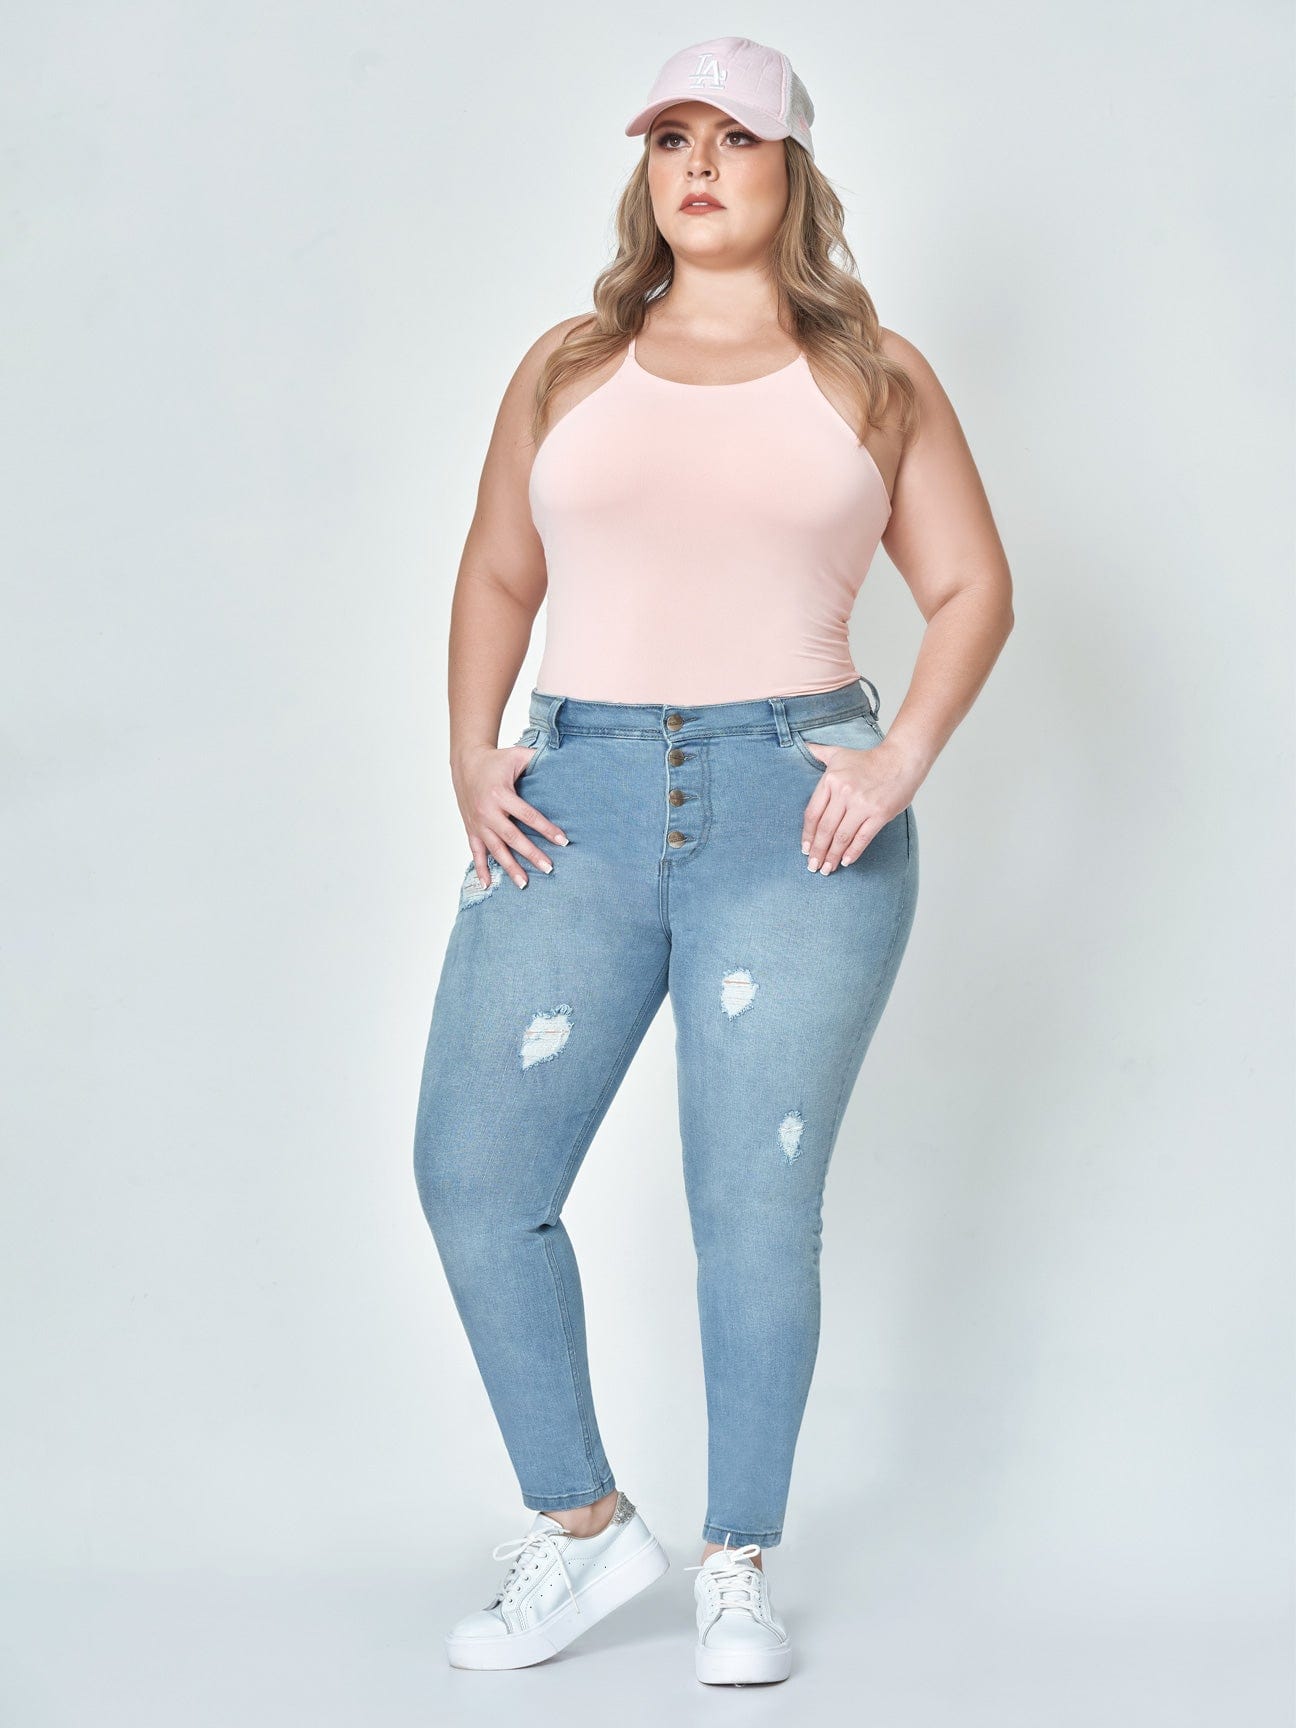 Hannah Butt Lift Stretch Skinny Jeans full body front view plus sized model.